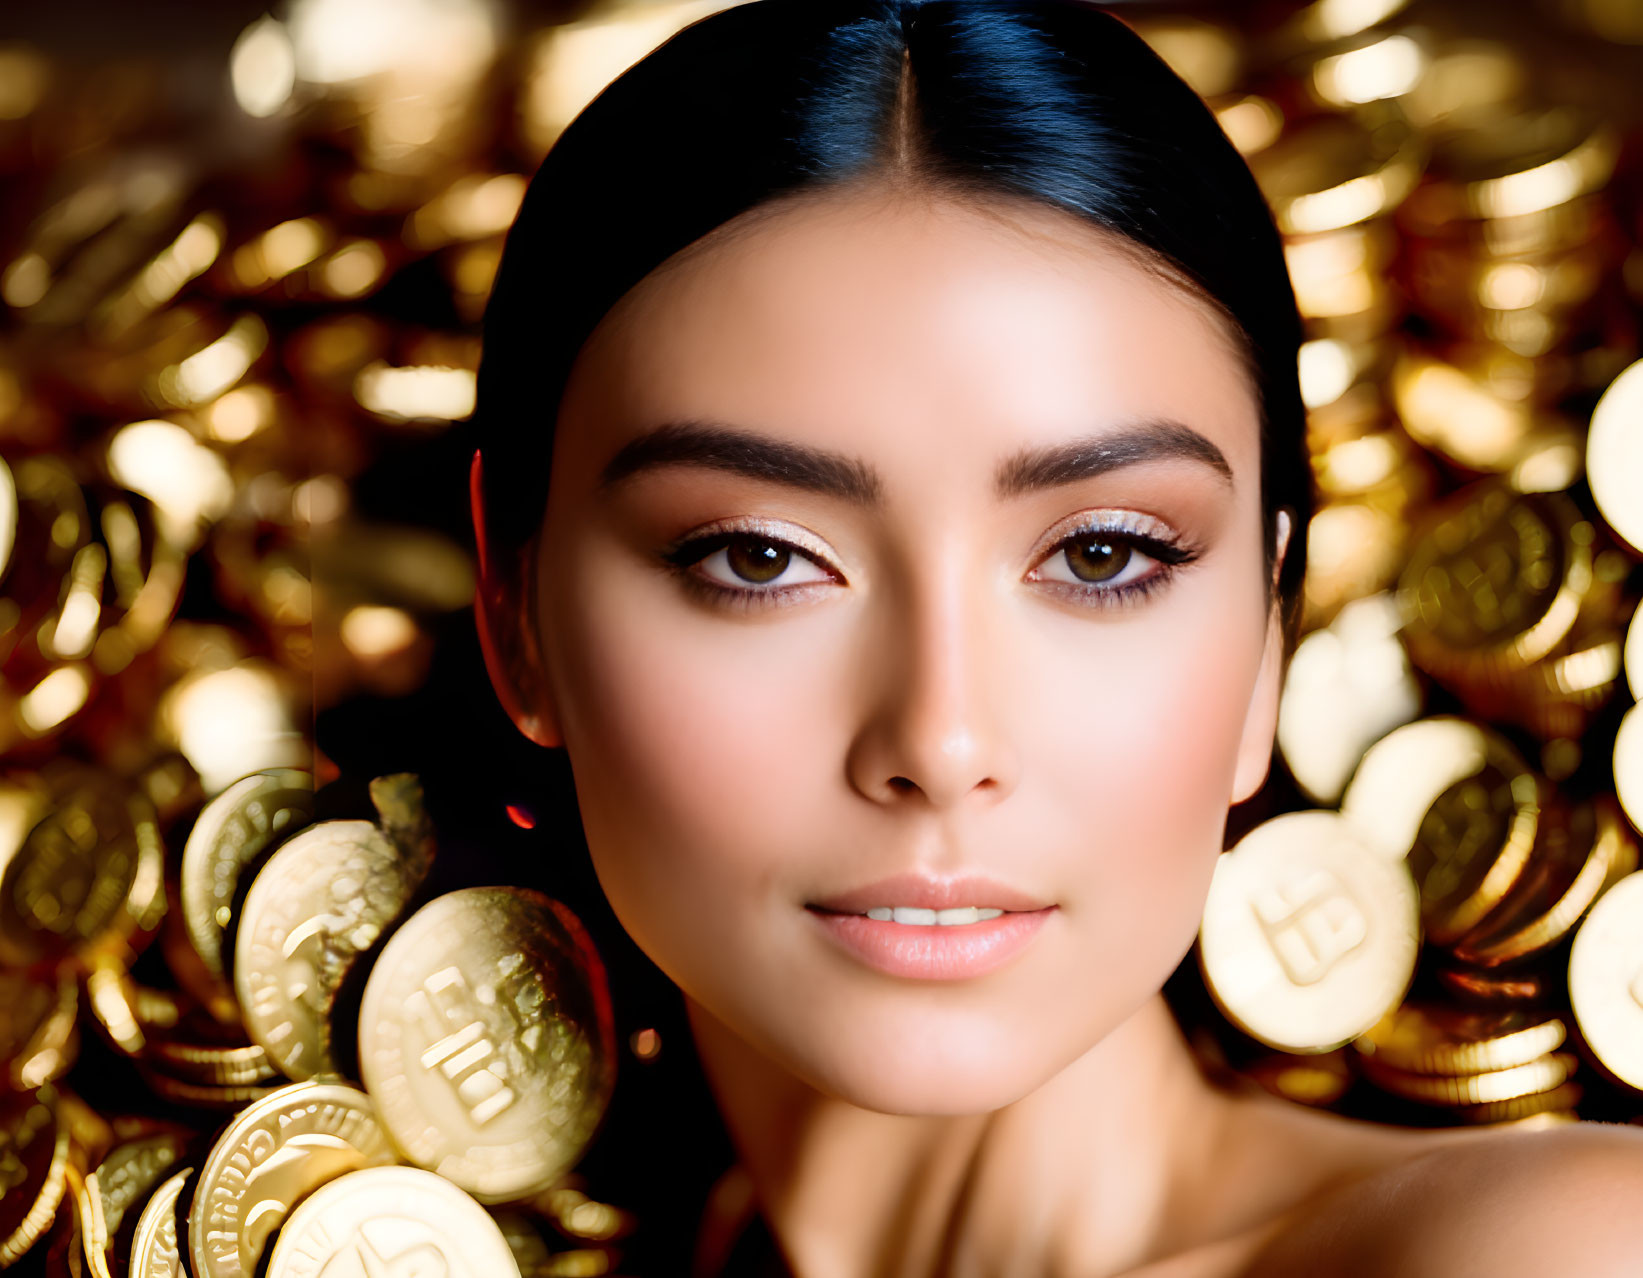 A beautiful girl lying on a pile of gold coins